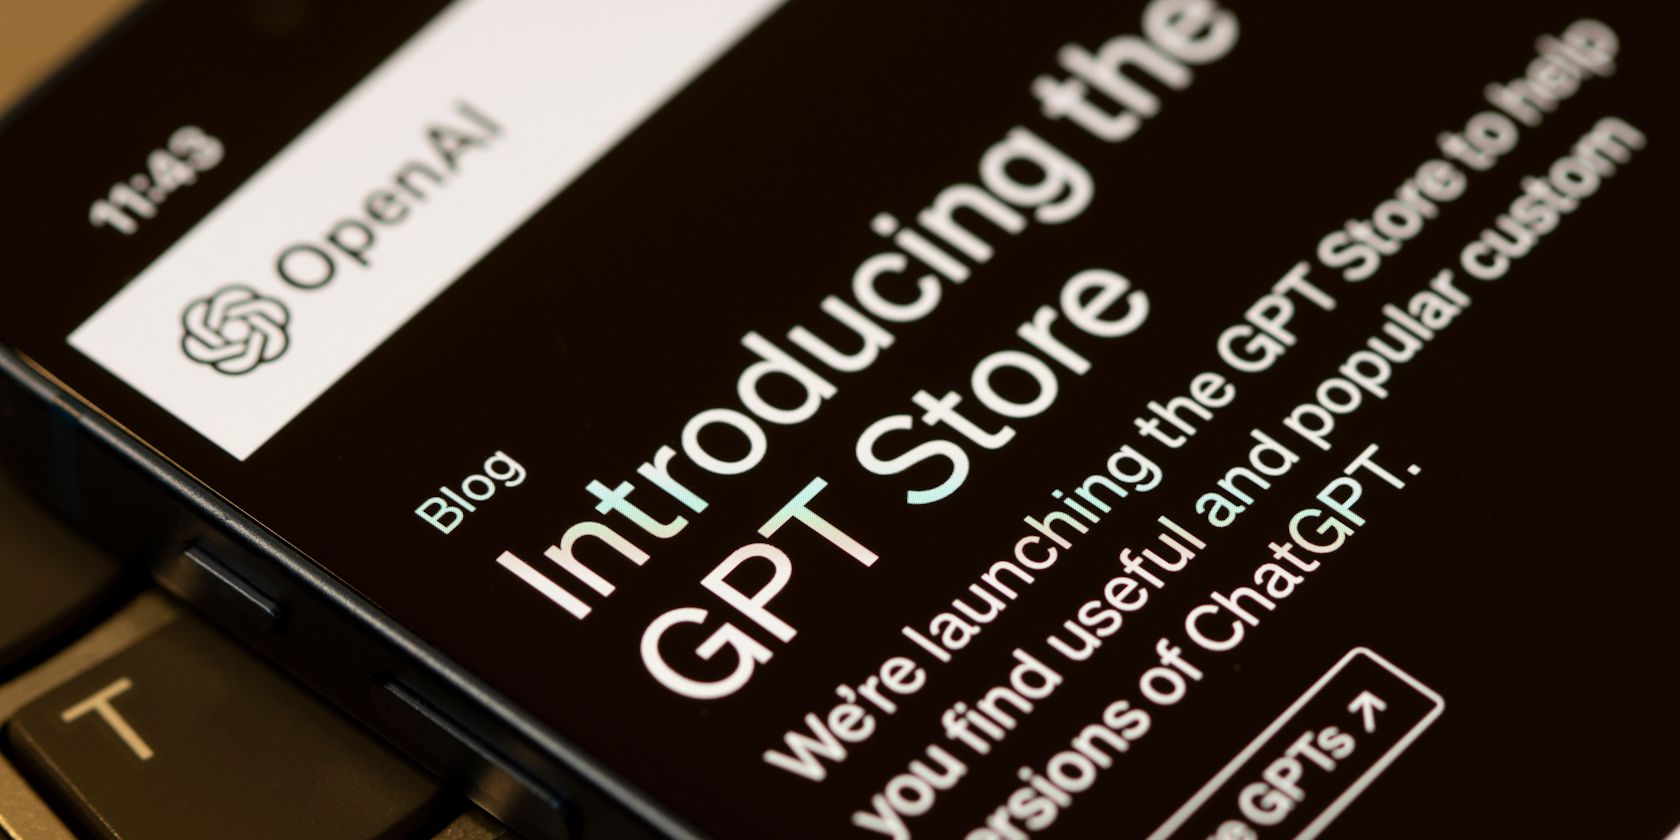 introducing gpt store information on smartphone screen